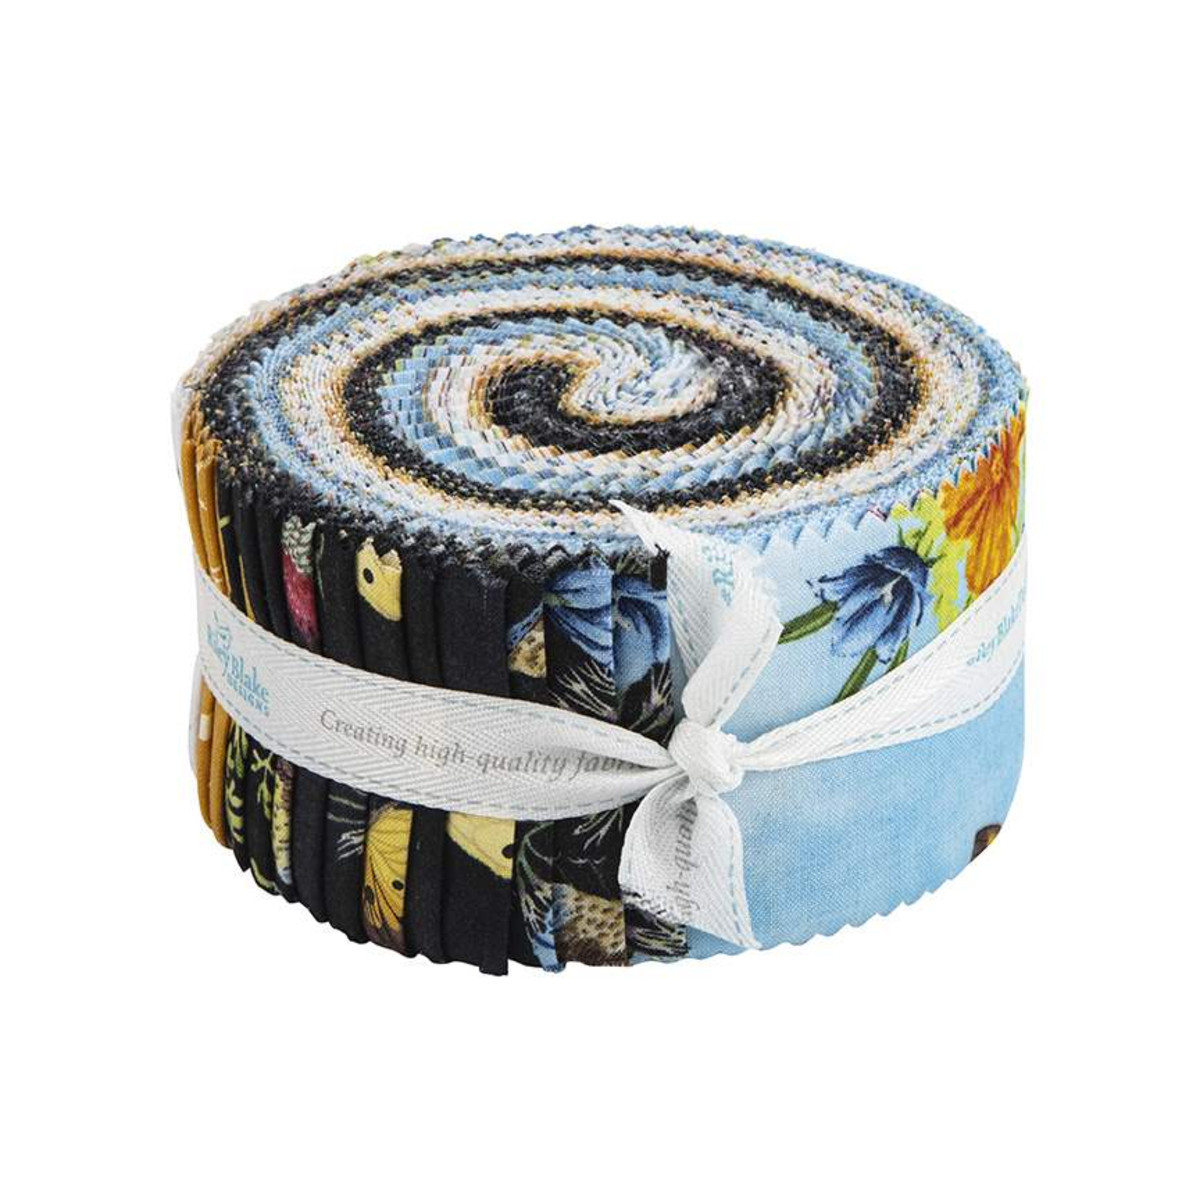 Riley Blake Jelly Roll - Golden Poppies by Shealeen Louise